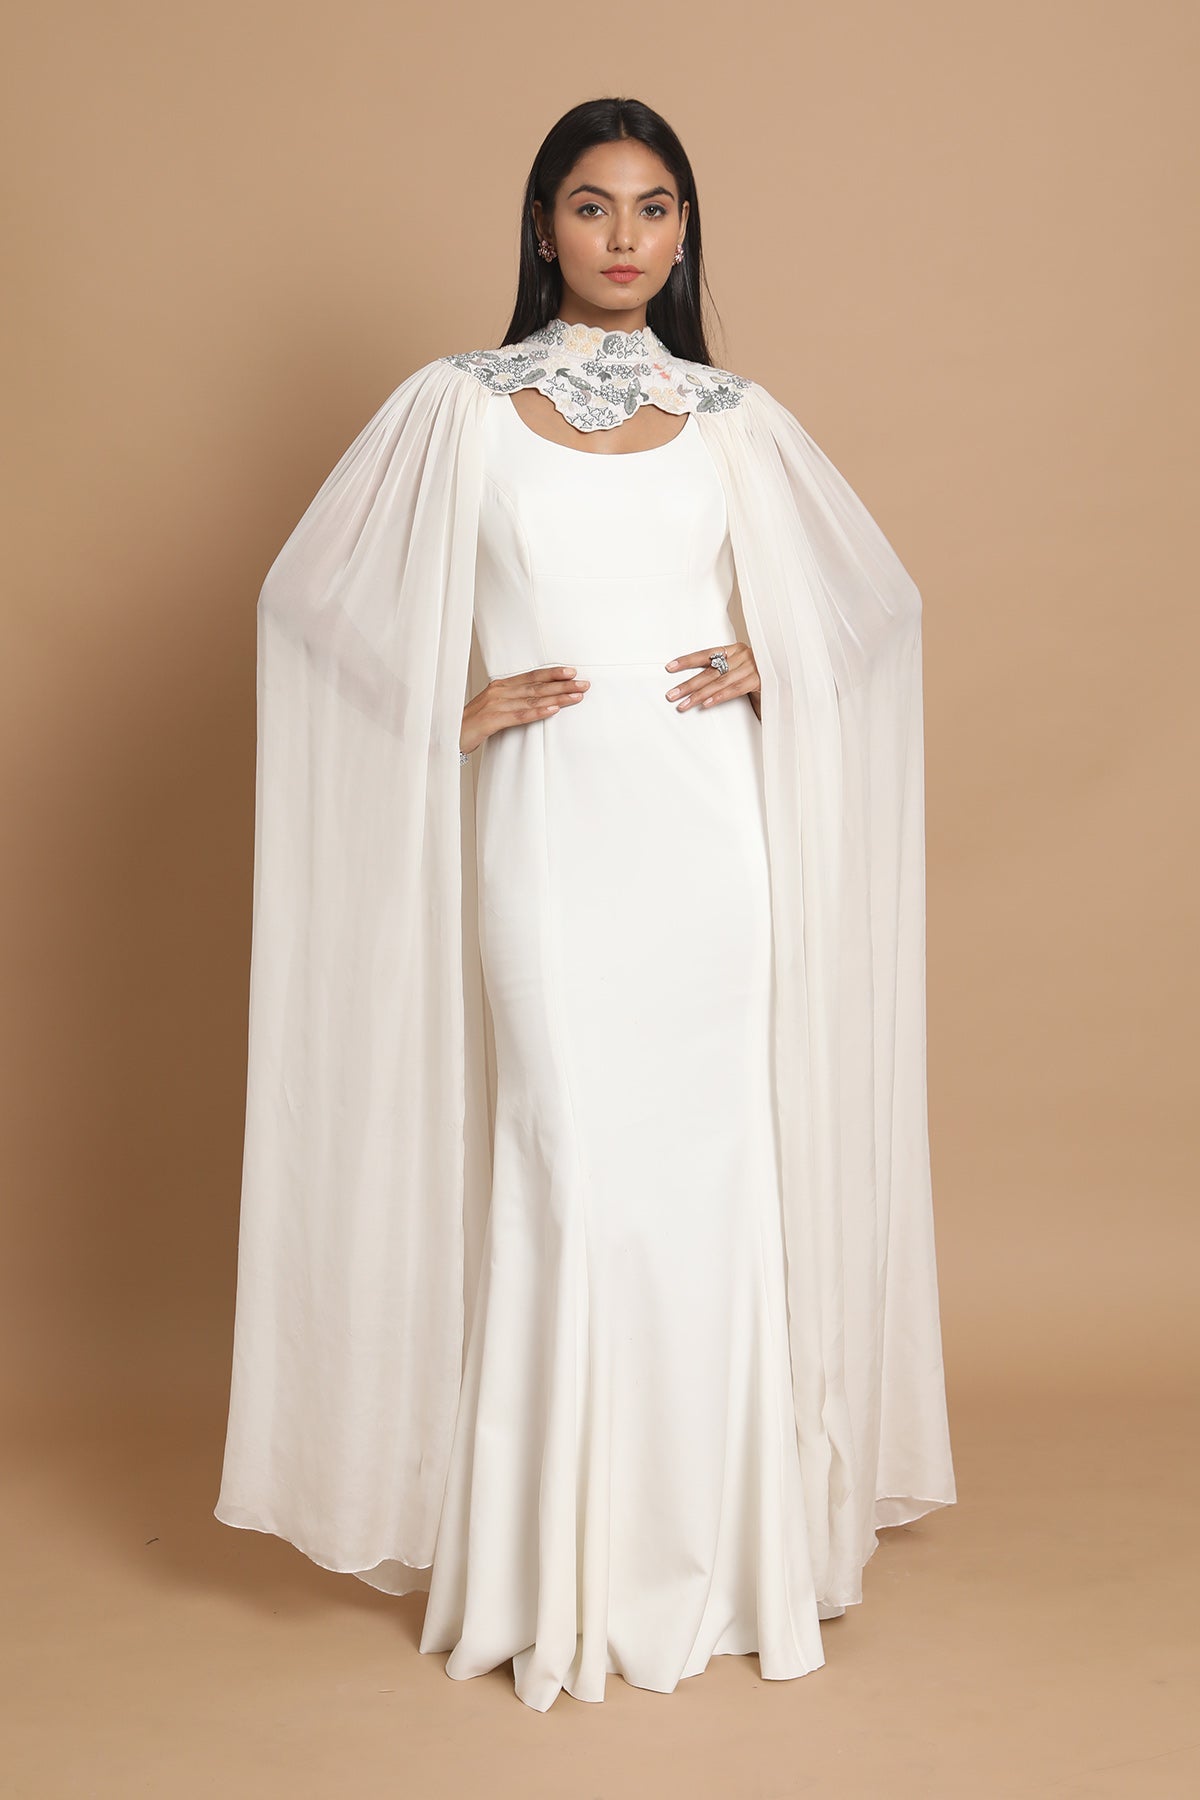 The Ivory Caped Gown